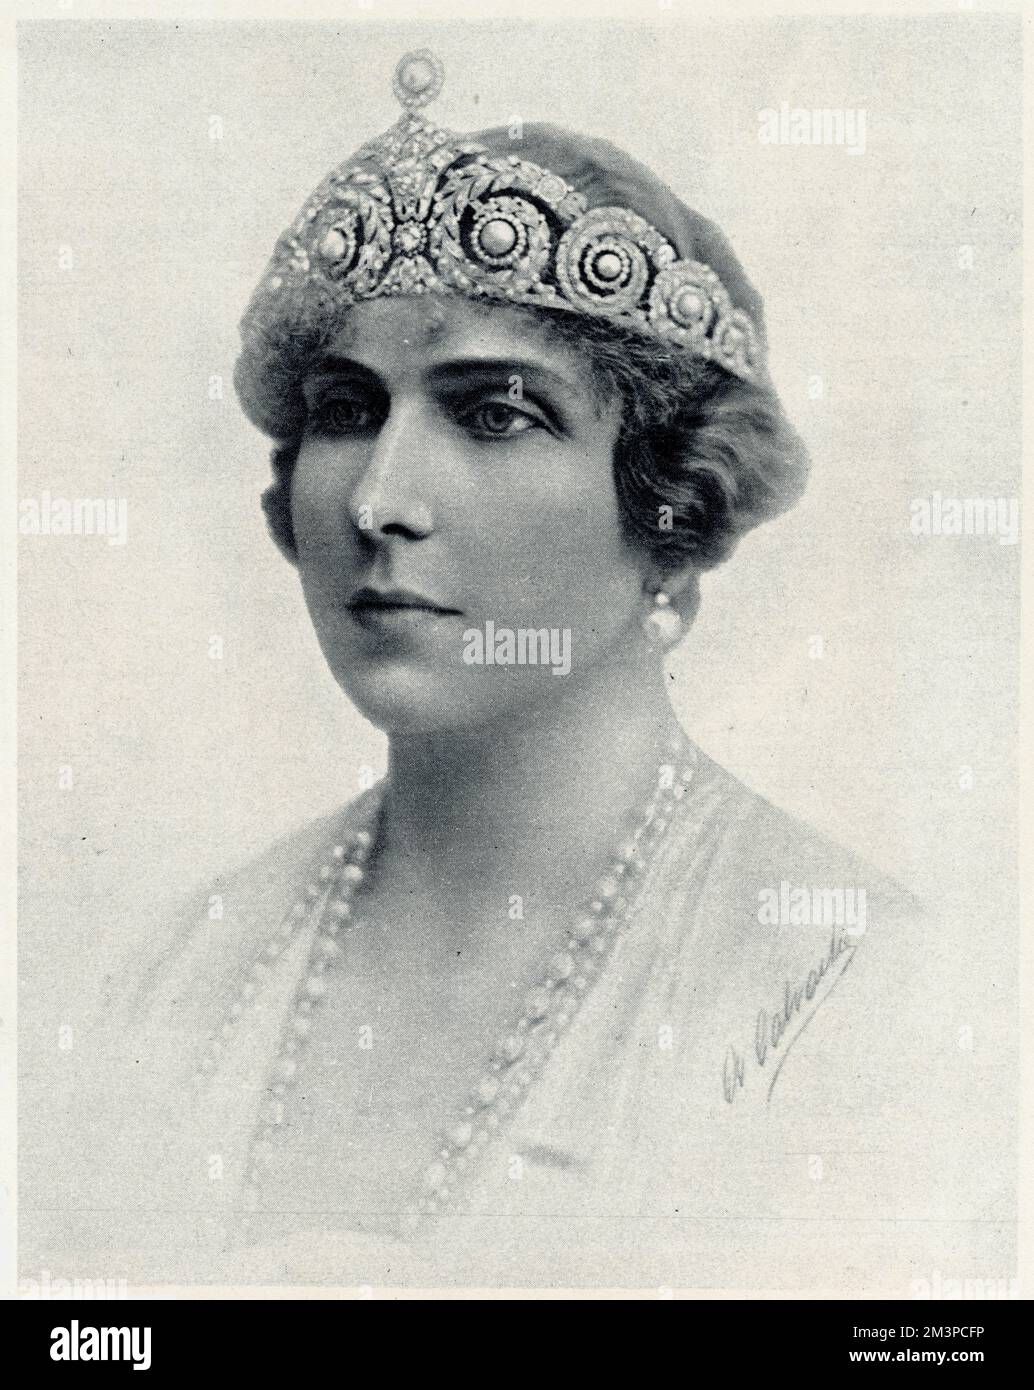 Queen Victoria Eugenie of Spain (1887 - 1969), Queen of Spain as the wife of King Alfonso XIII. She was a granddaughter of Queen Victoria of the United Kingdom; and the first cousin of King George V of the United Kingdom. She married King Alfonso XIII of Spain in 1906 and had six children. The couple began to lead separate lives and eventually separated when the Royal family were forced into exile in 1931 with the proclamation of the Spanish Republic.  1923 Stock Photo